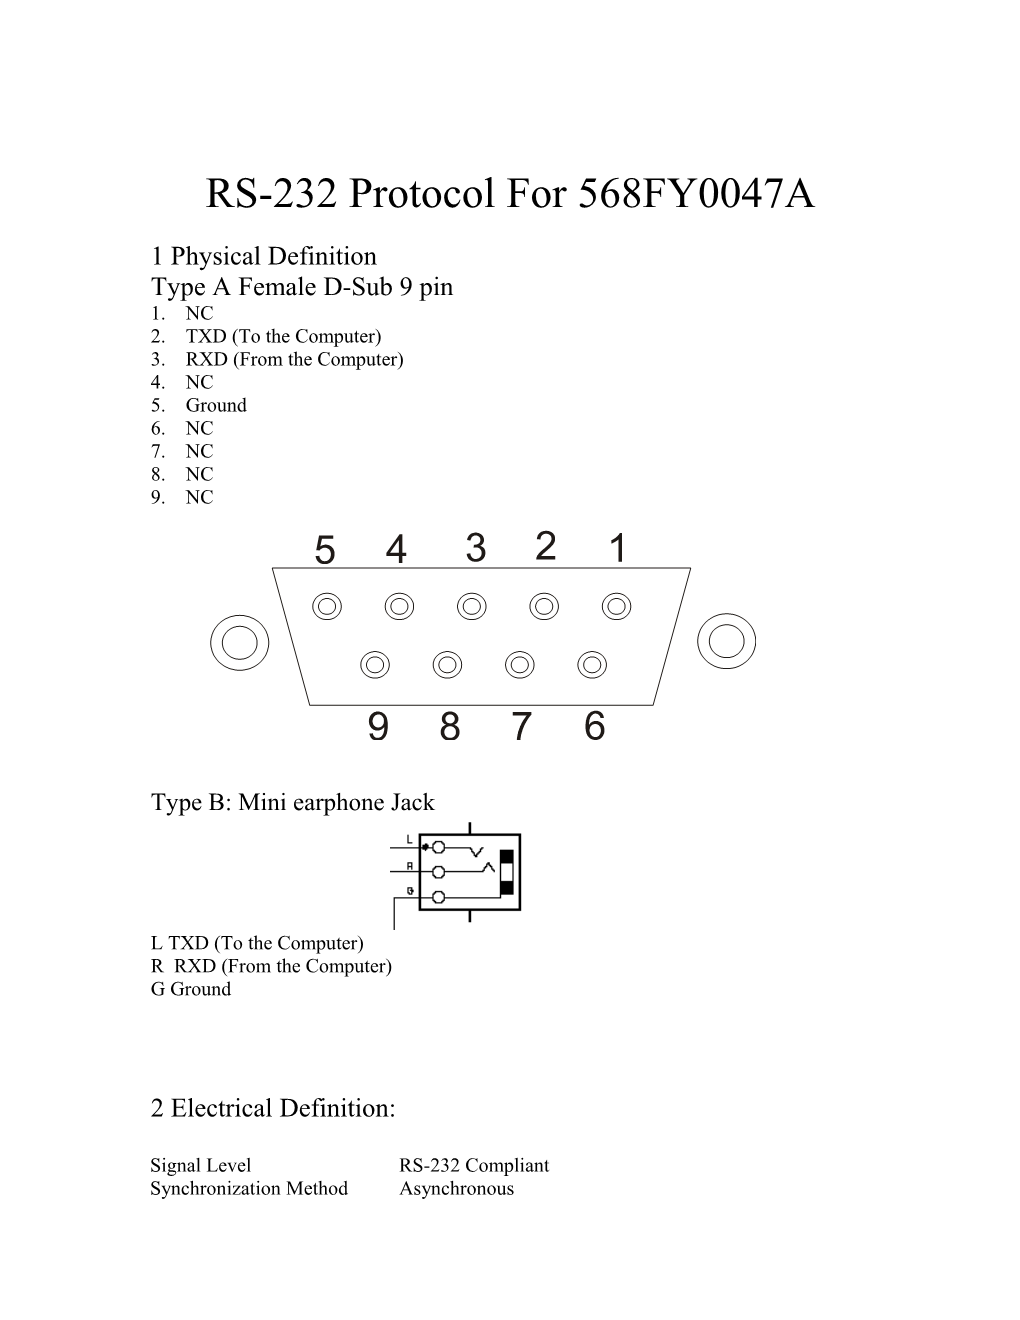 RS-232 Protocol for 568FY0047A